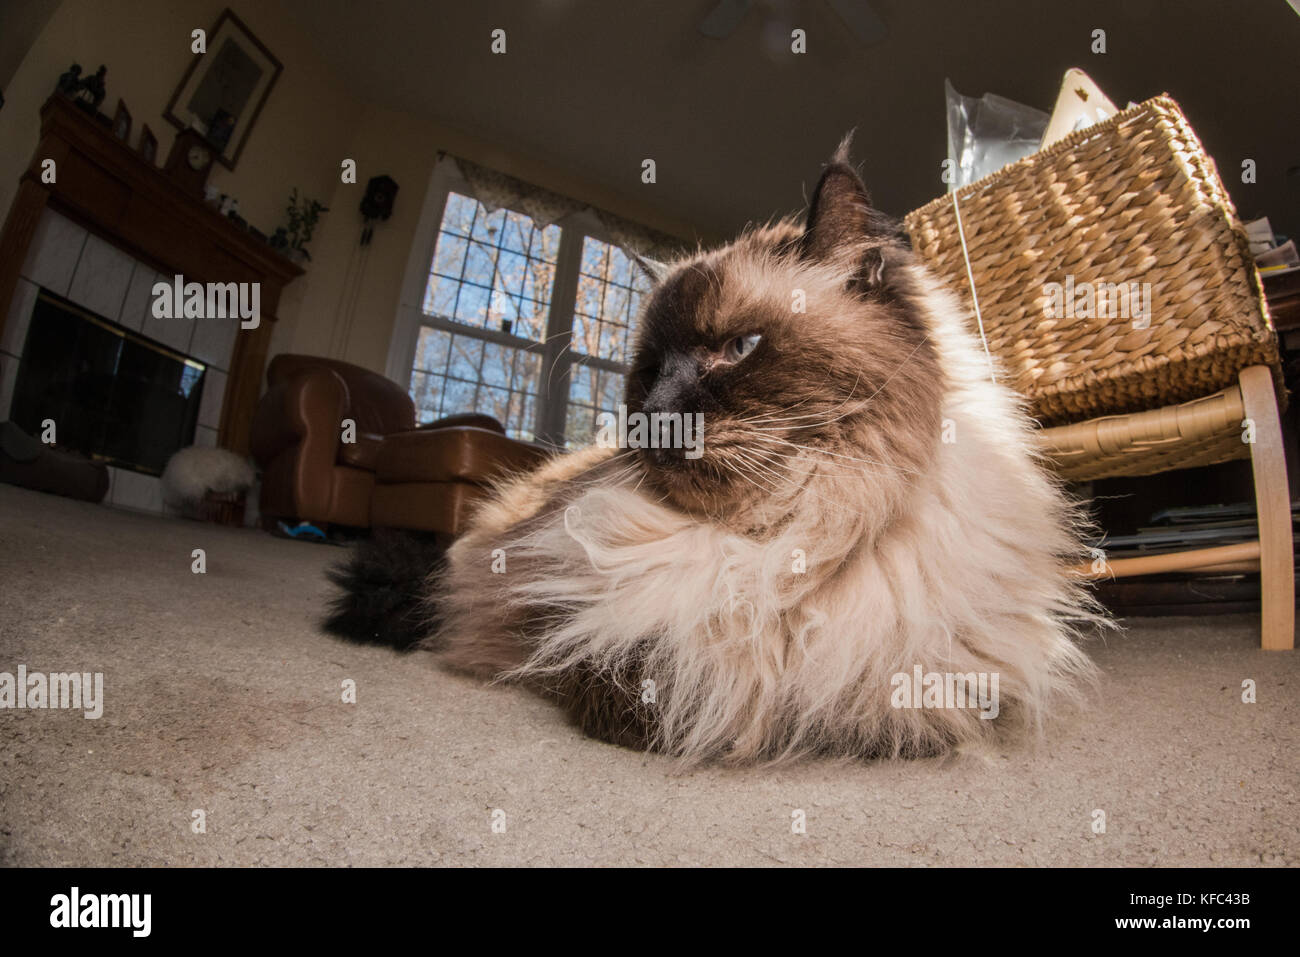 A Himalayan siamese cat enjoying himself and laying about inside a house. Stock Photo